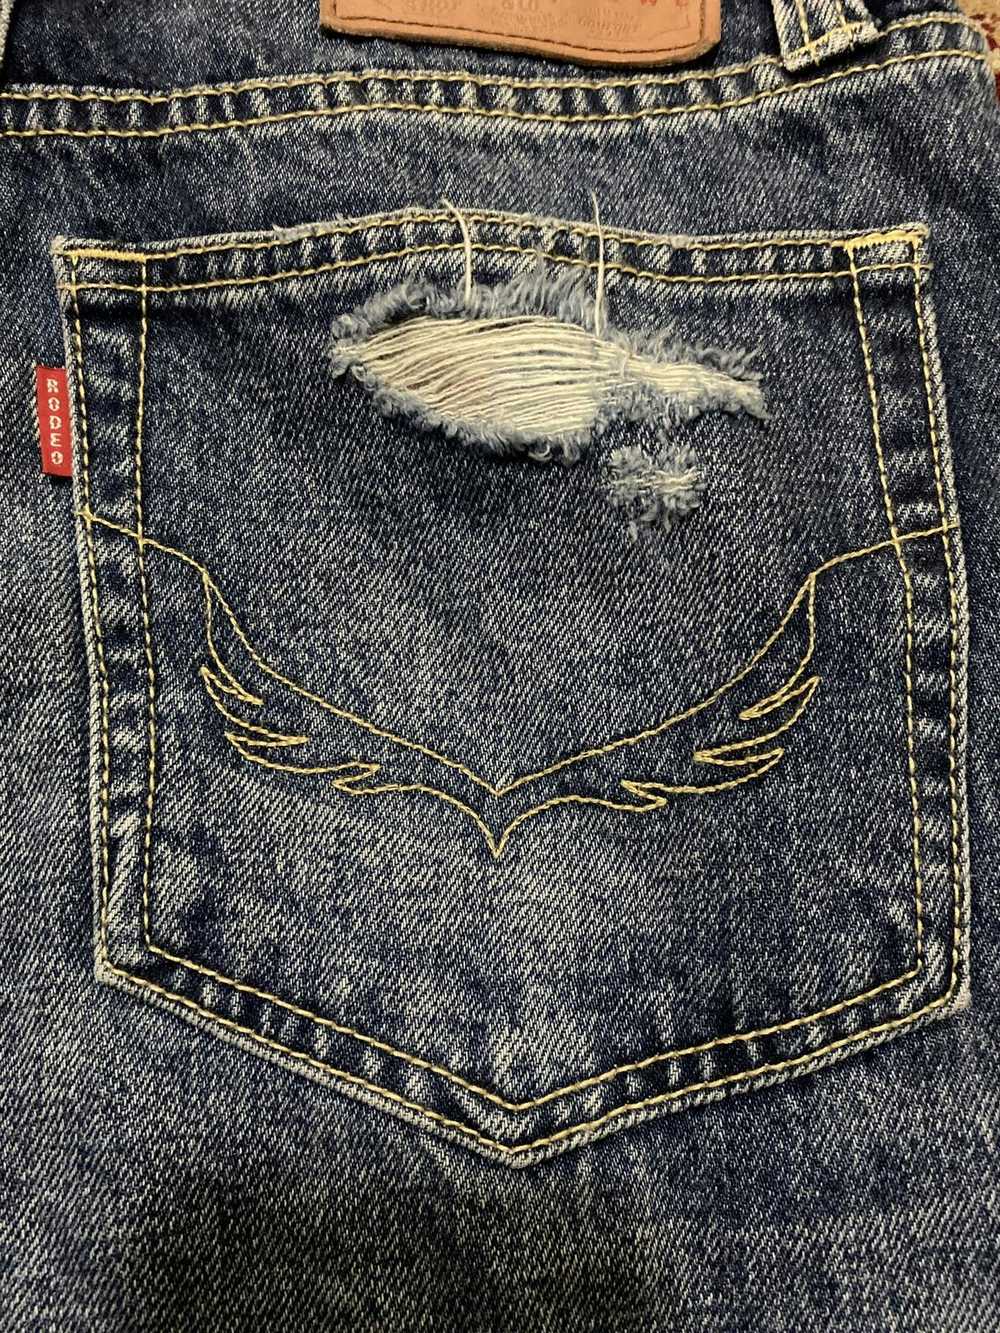 Japanese Brand - Rodeo Crowns Japan Distressed Pa… - image 7